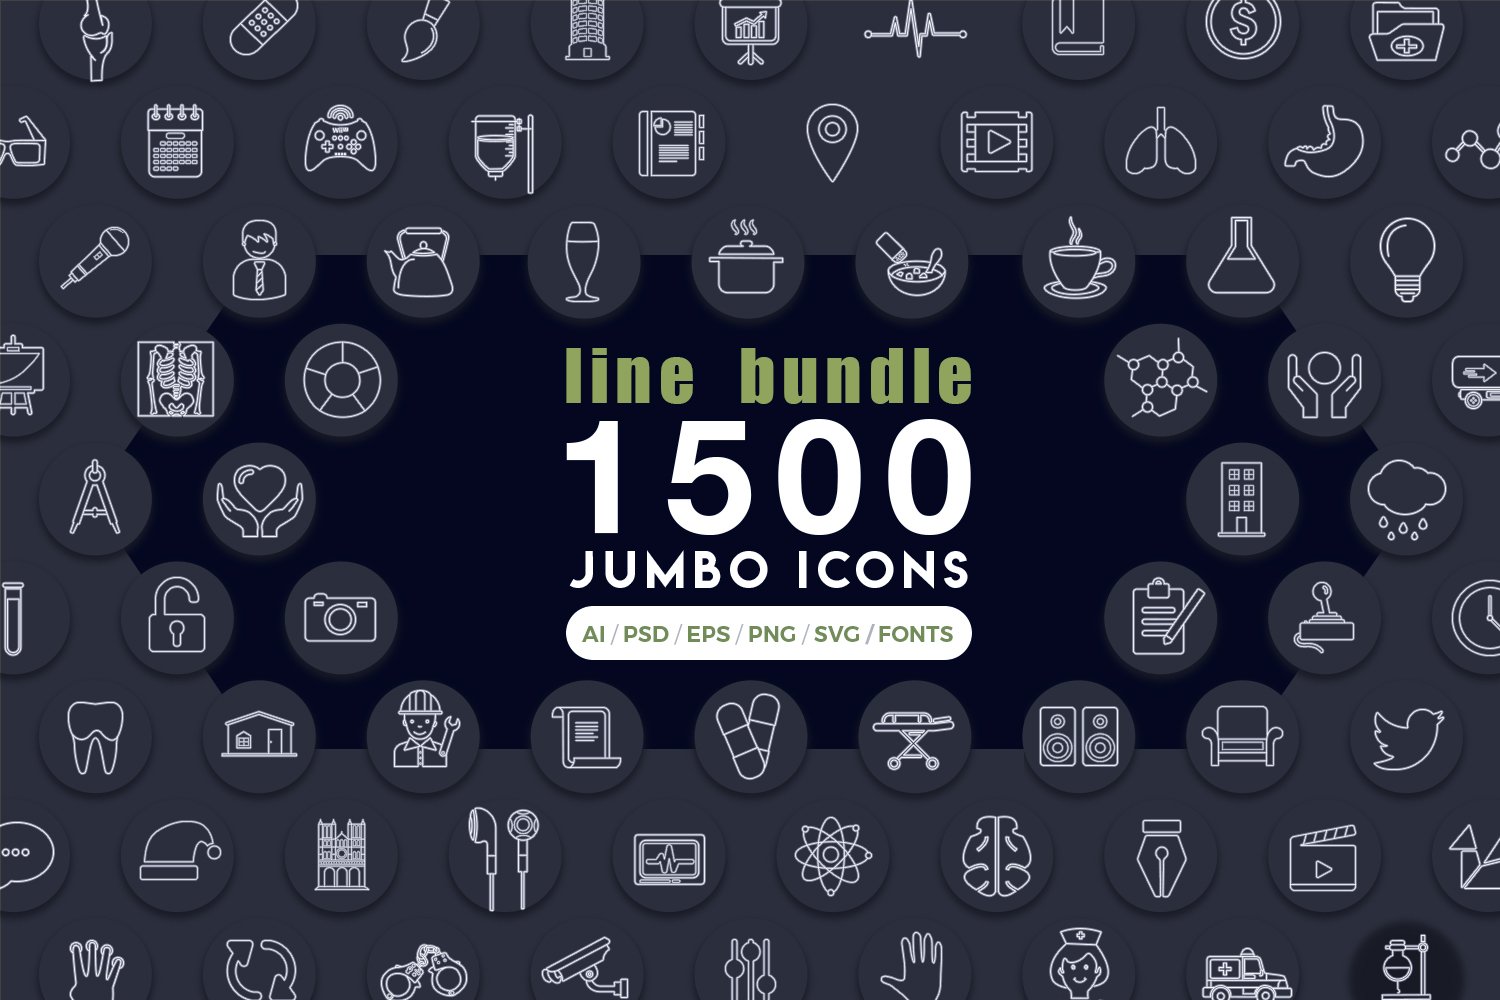 Jumbo Line Icons Pack cover image.